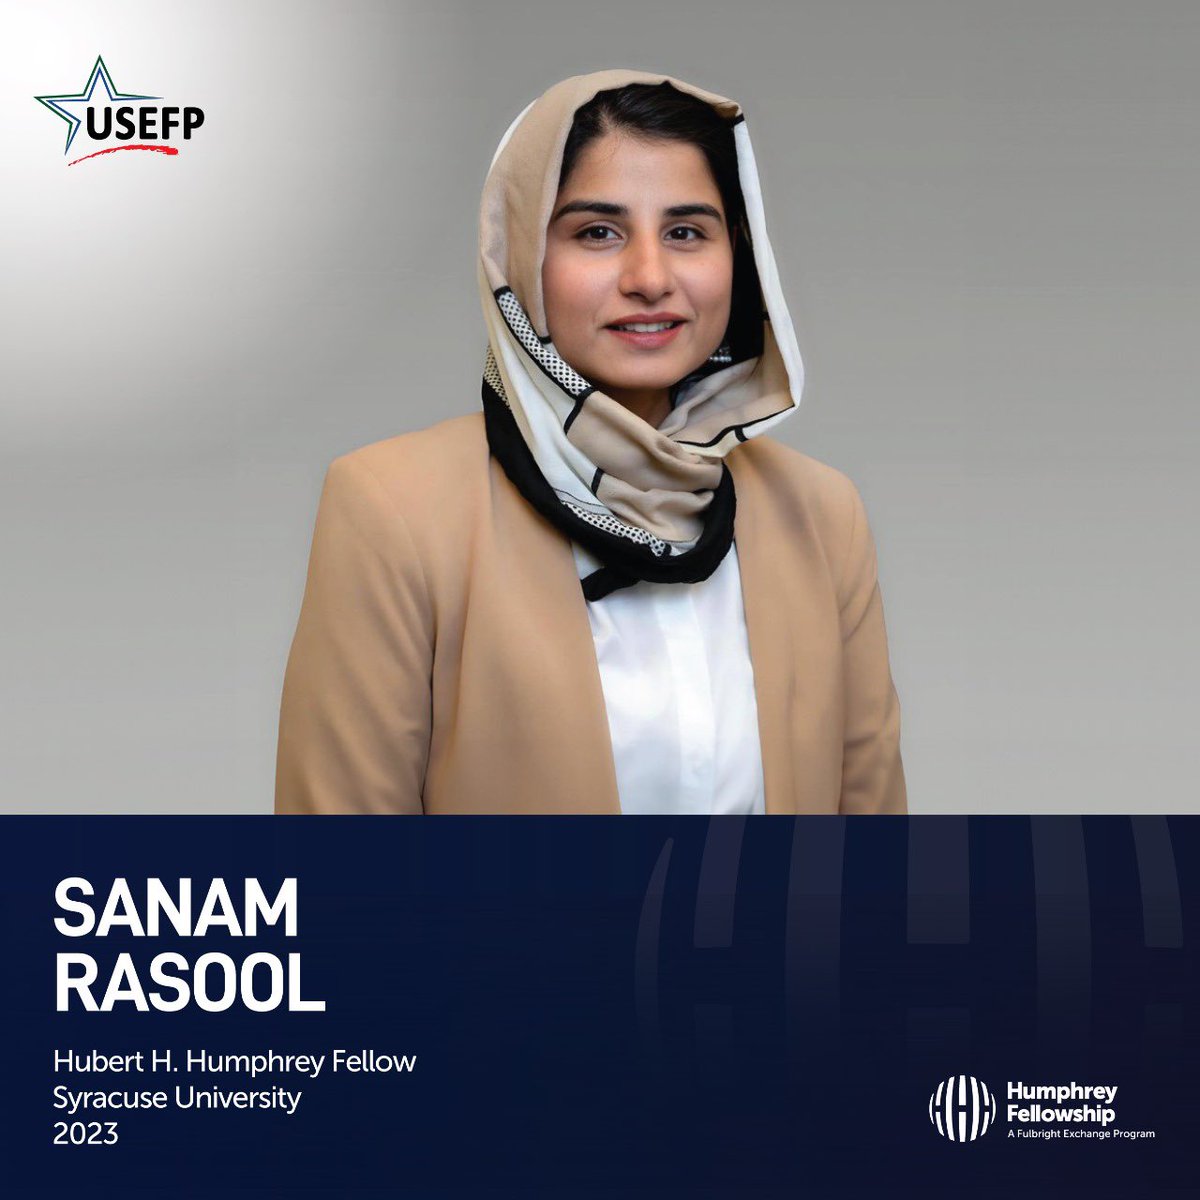 As the Deputy Commissioner of Inland Revenue at FBR, #Humphrey Fellow Sanam Rasool is learning about international best practices for investigating tax fraud. Her aim is to introduce advanced data-driven policies and analysis for tax policy administration in Pakistan. #USEFP #Tax